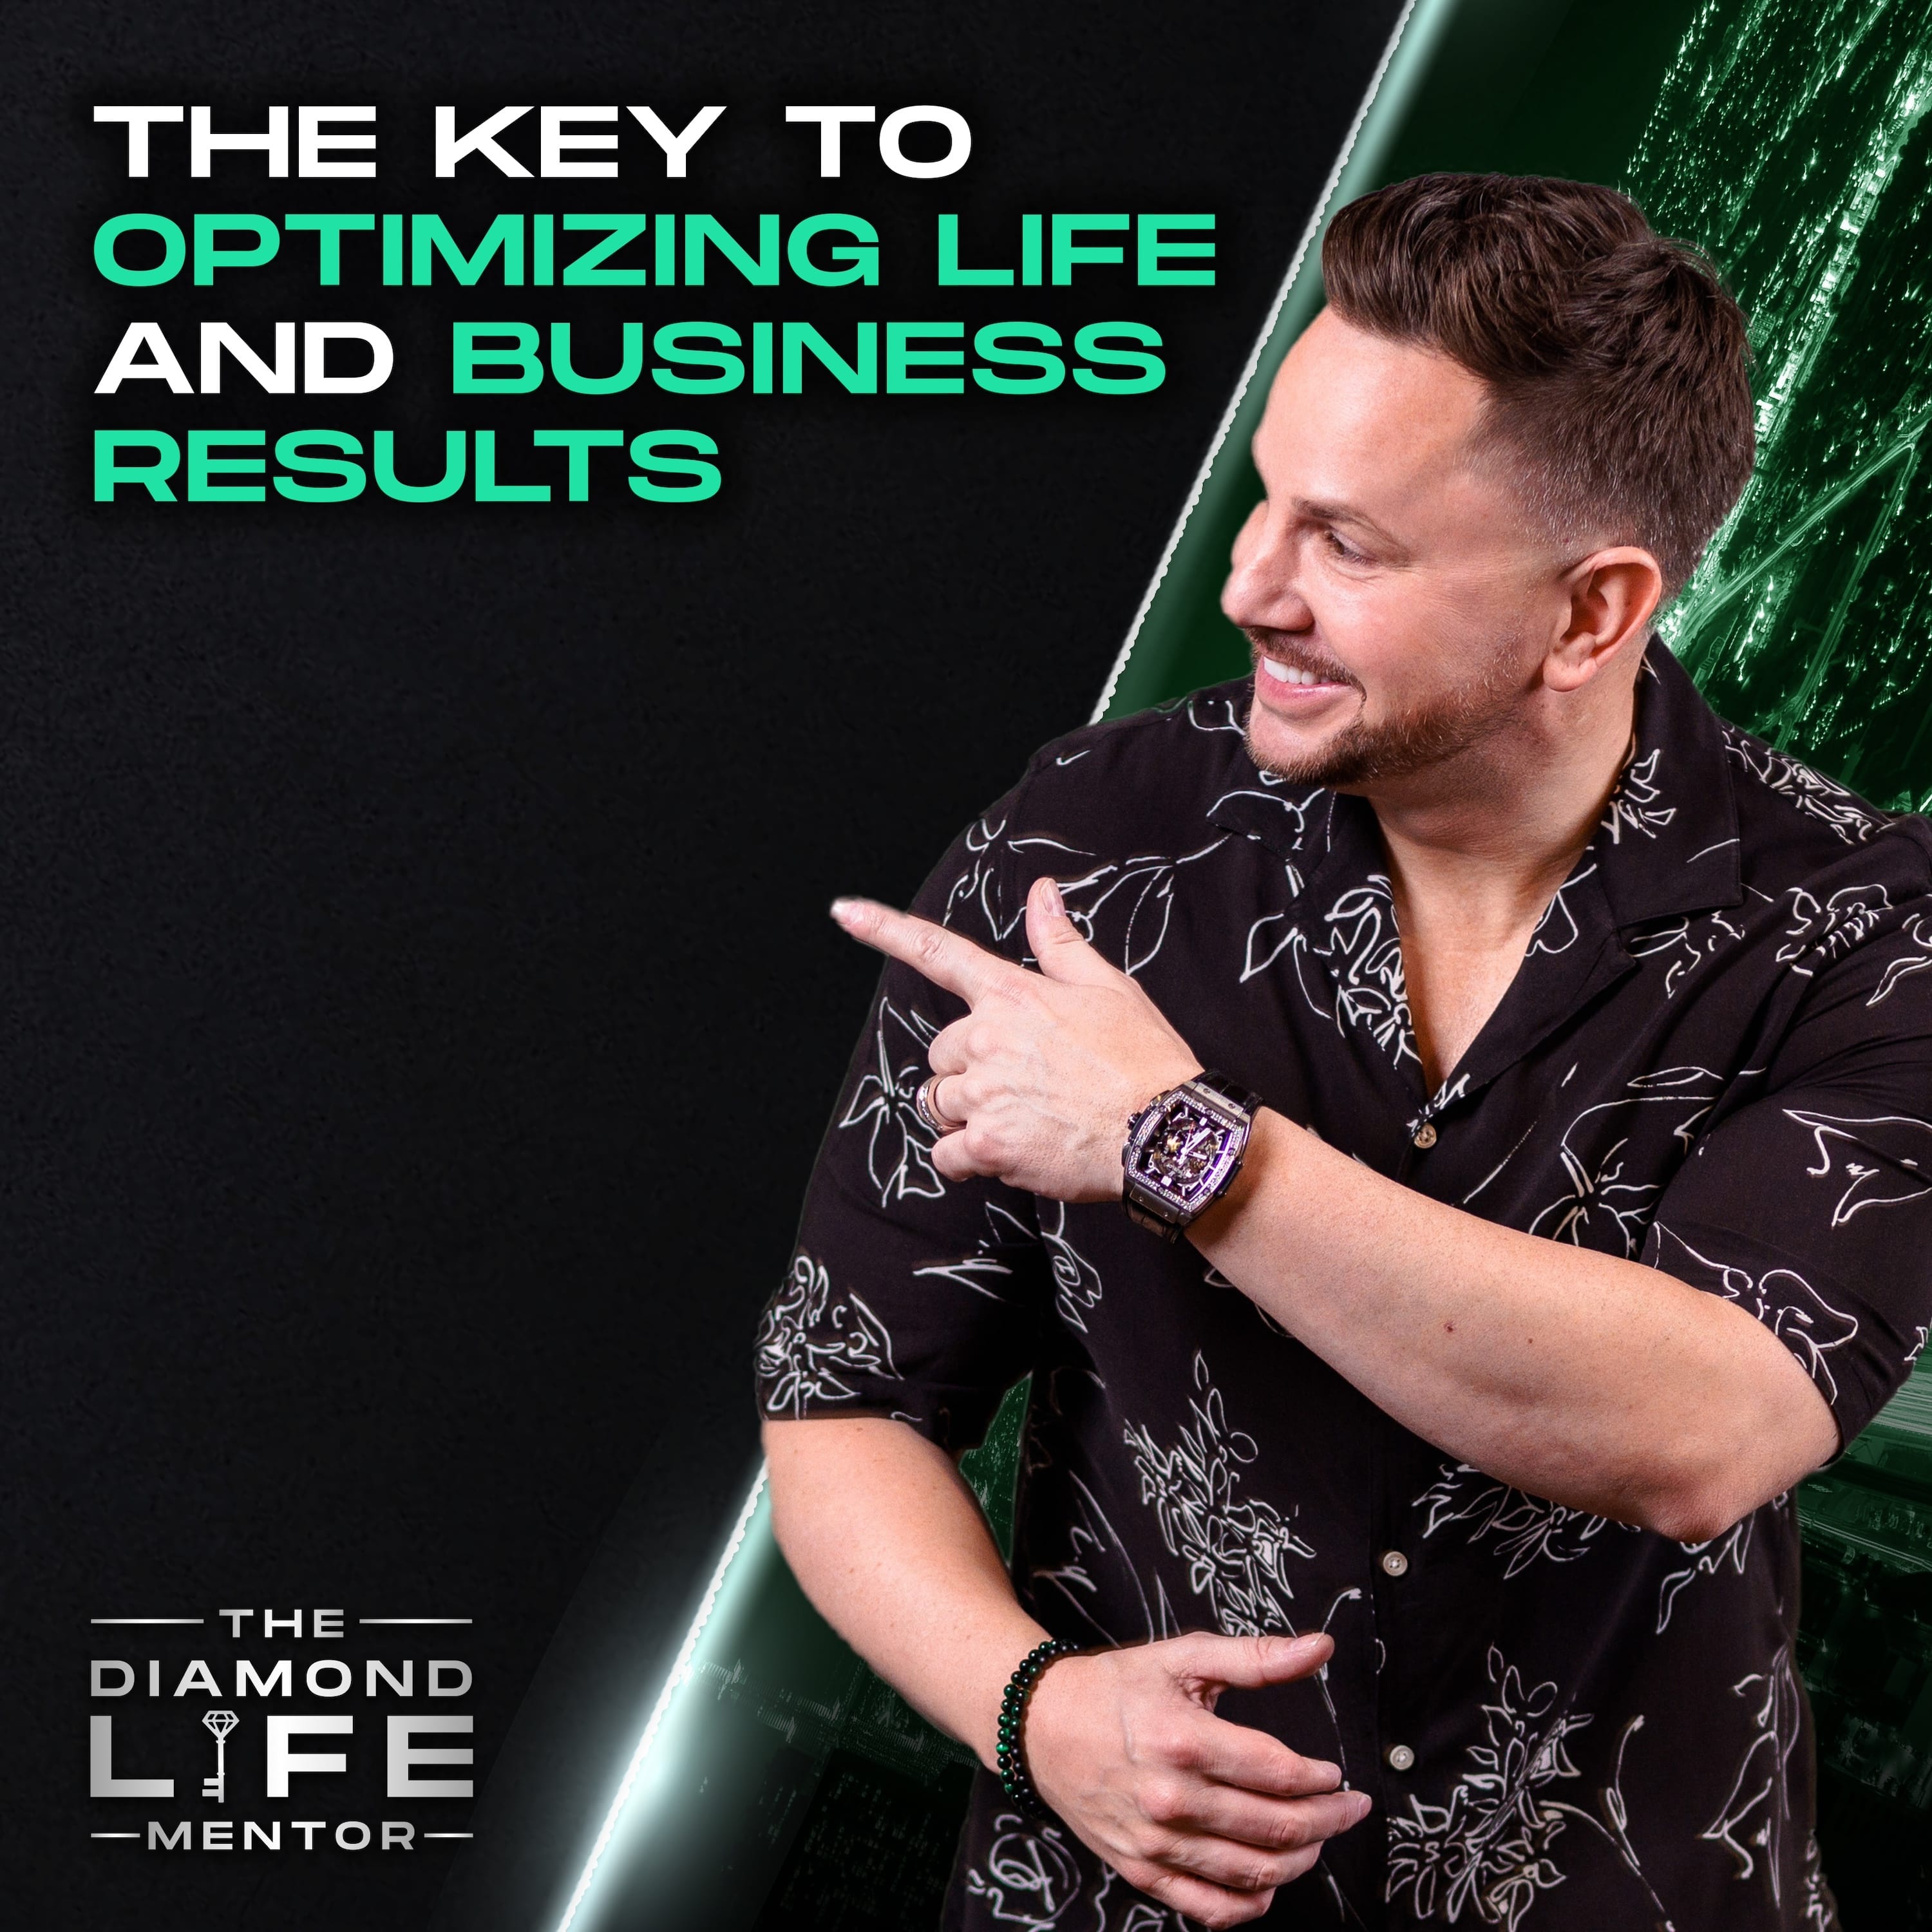 The Key to Optimizing Life and Business Results